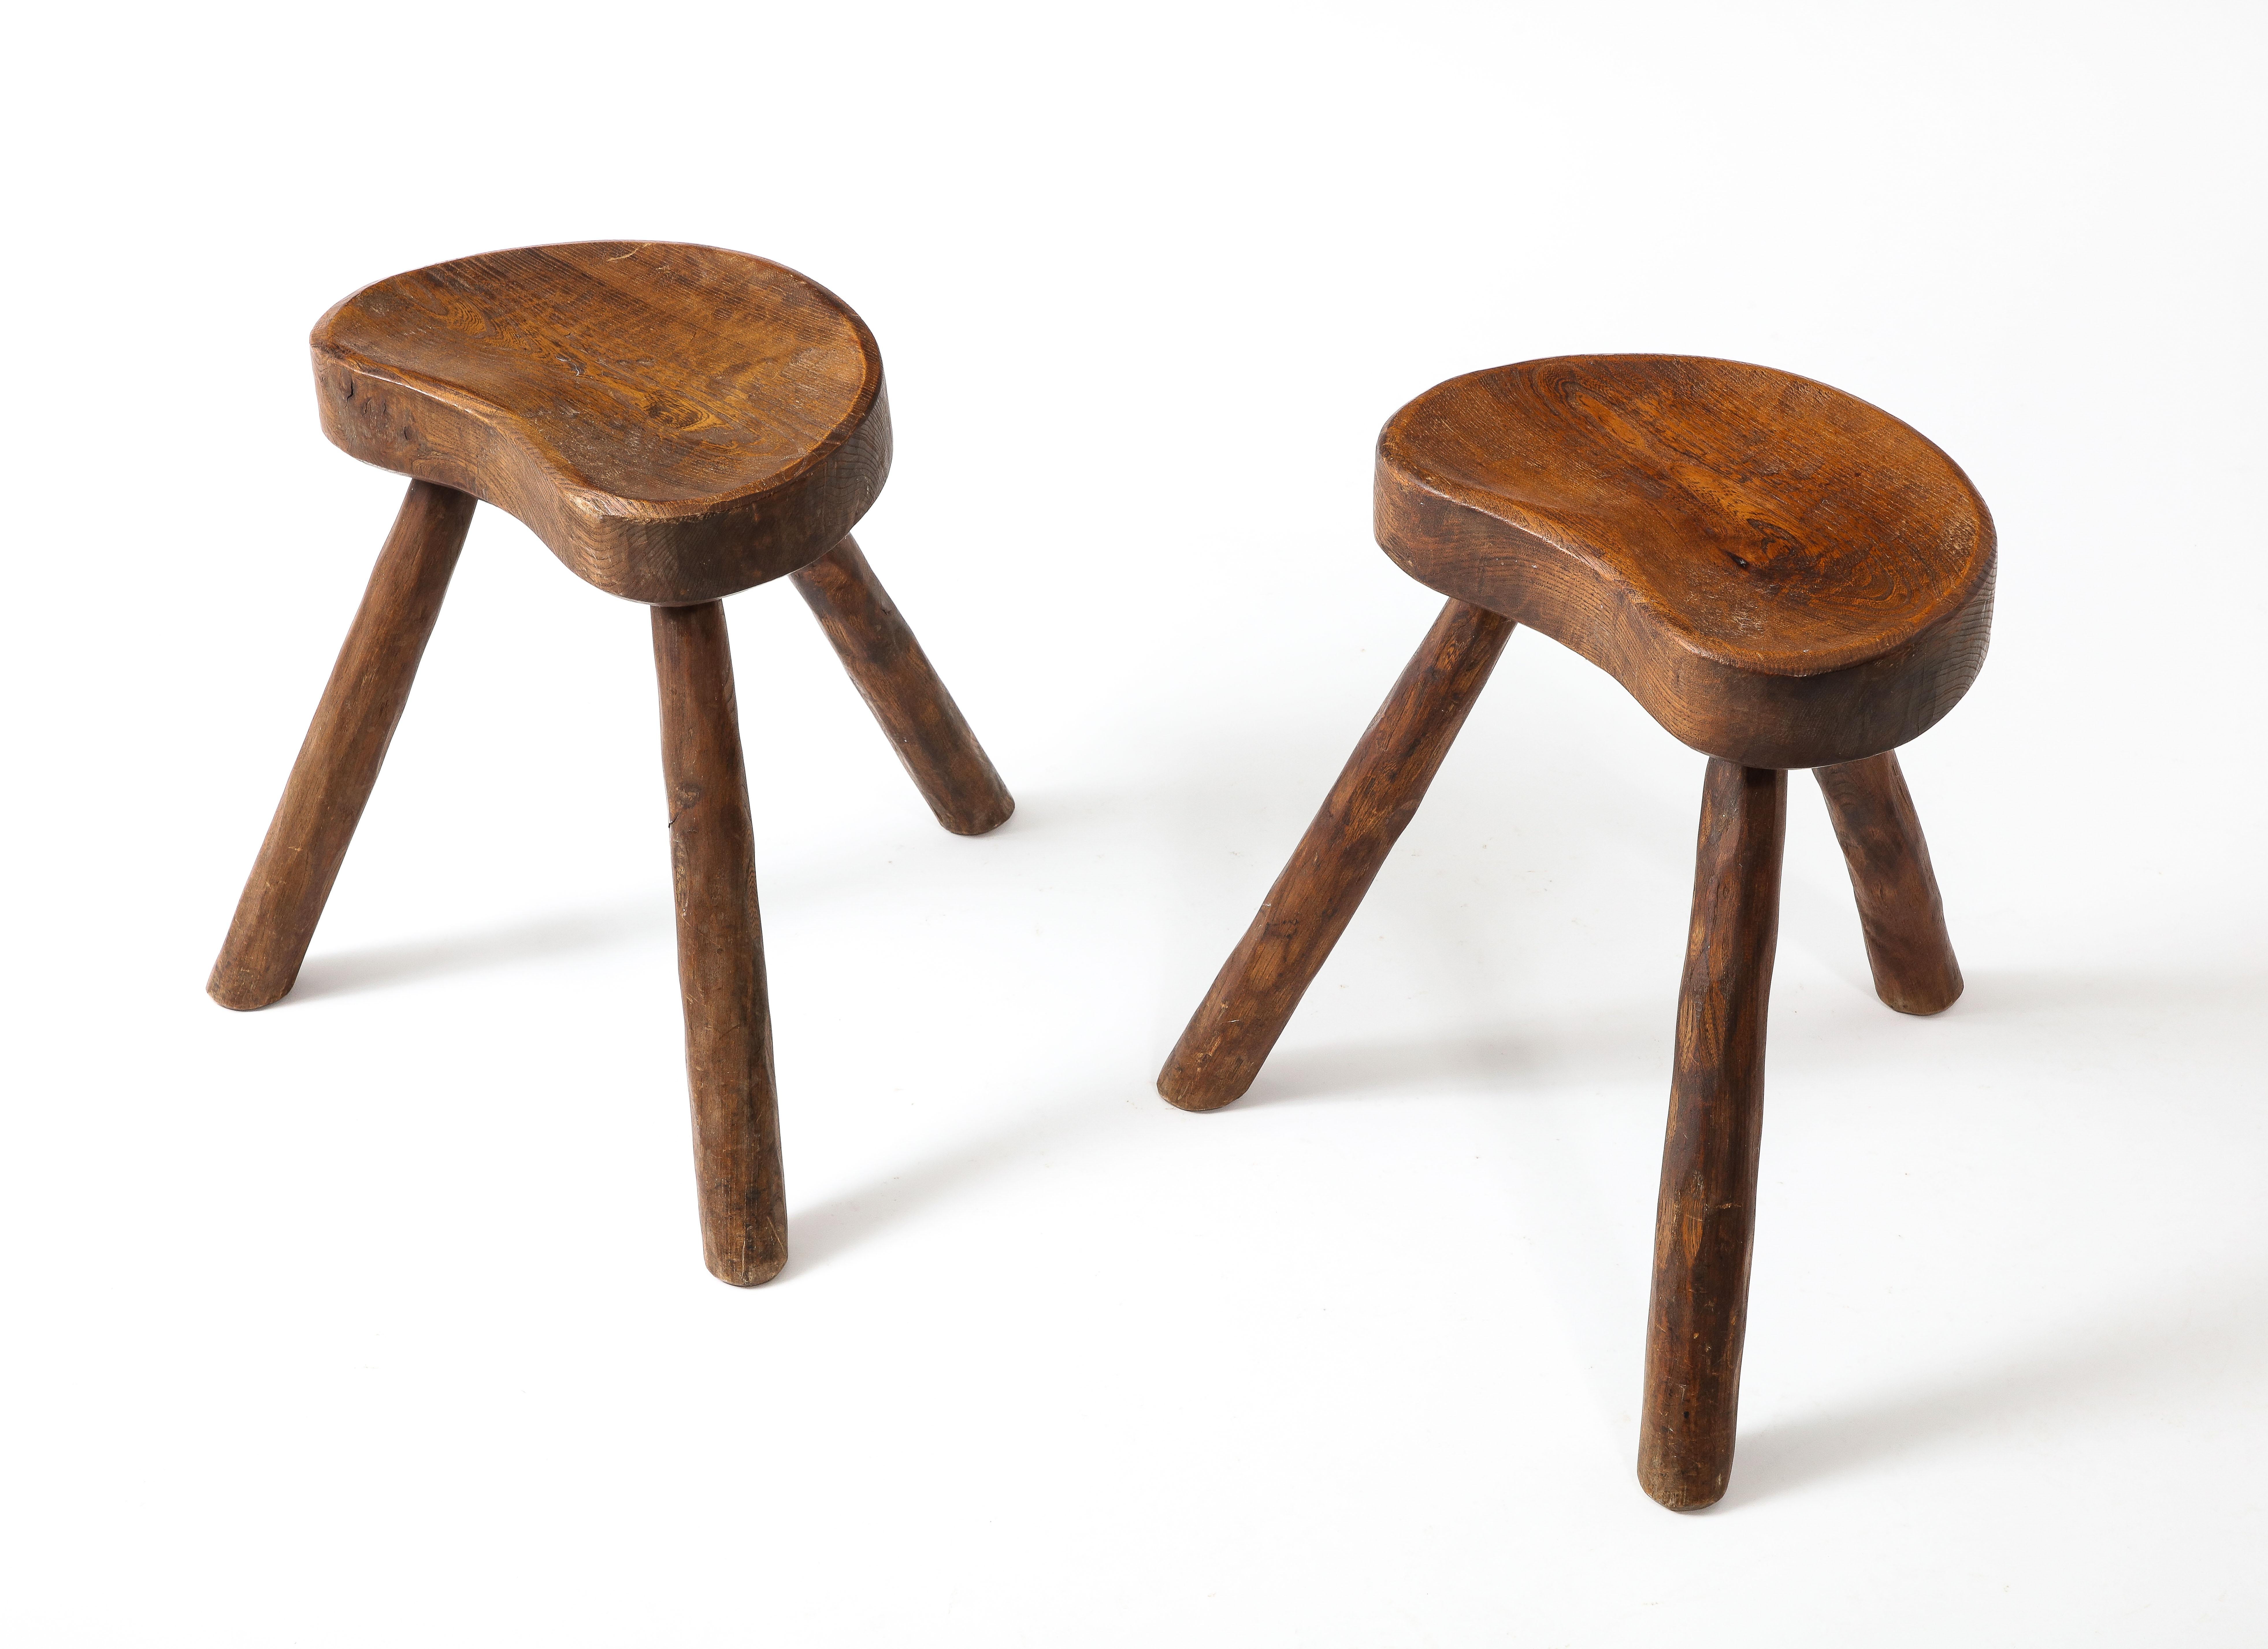 Handsome pair of stools in hand-carved stools in the Manner of Jean Touret and ateliers Marolles, Solid elm with carved and gouged seating area. Seat is 10x15. The price is for a pair. Three pairs available.